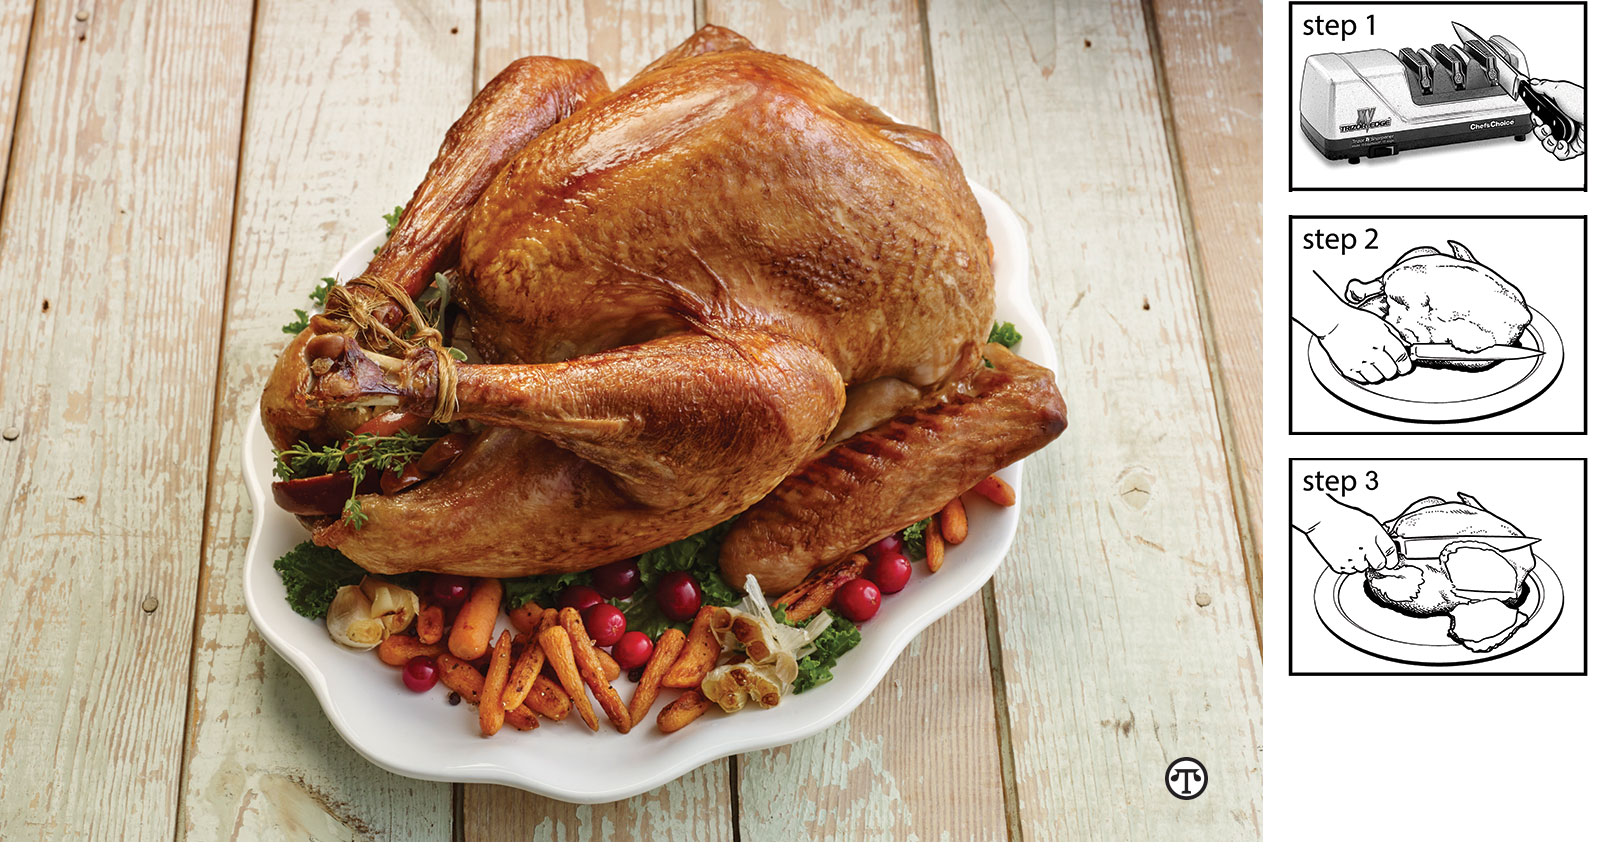 To carve a turkey right, make sure the knife you use is sharp, advises cookbook author and chef Nathalie Dupree.